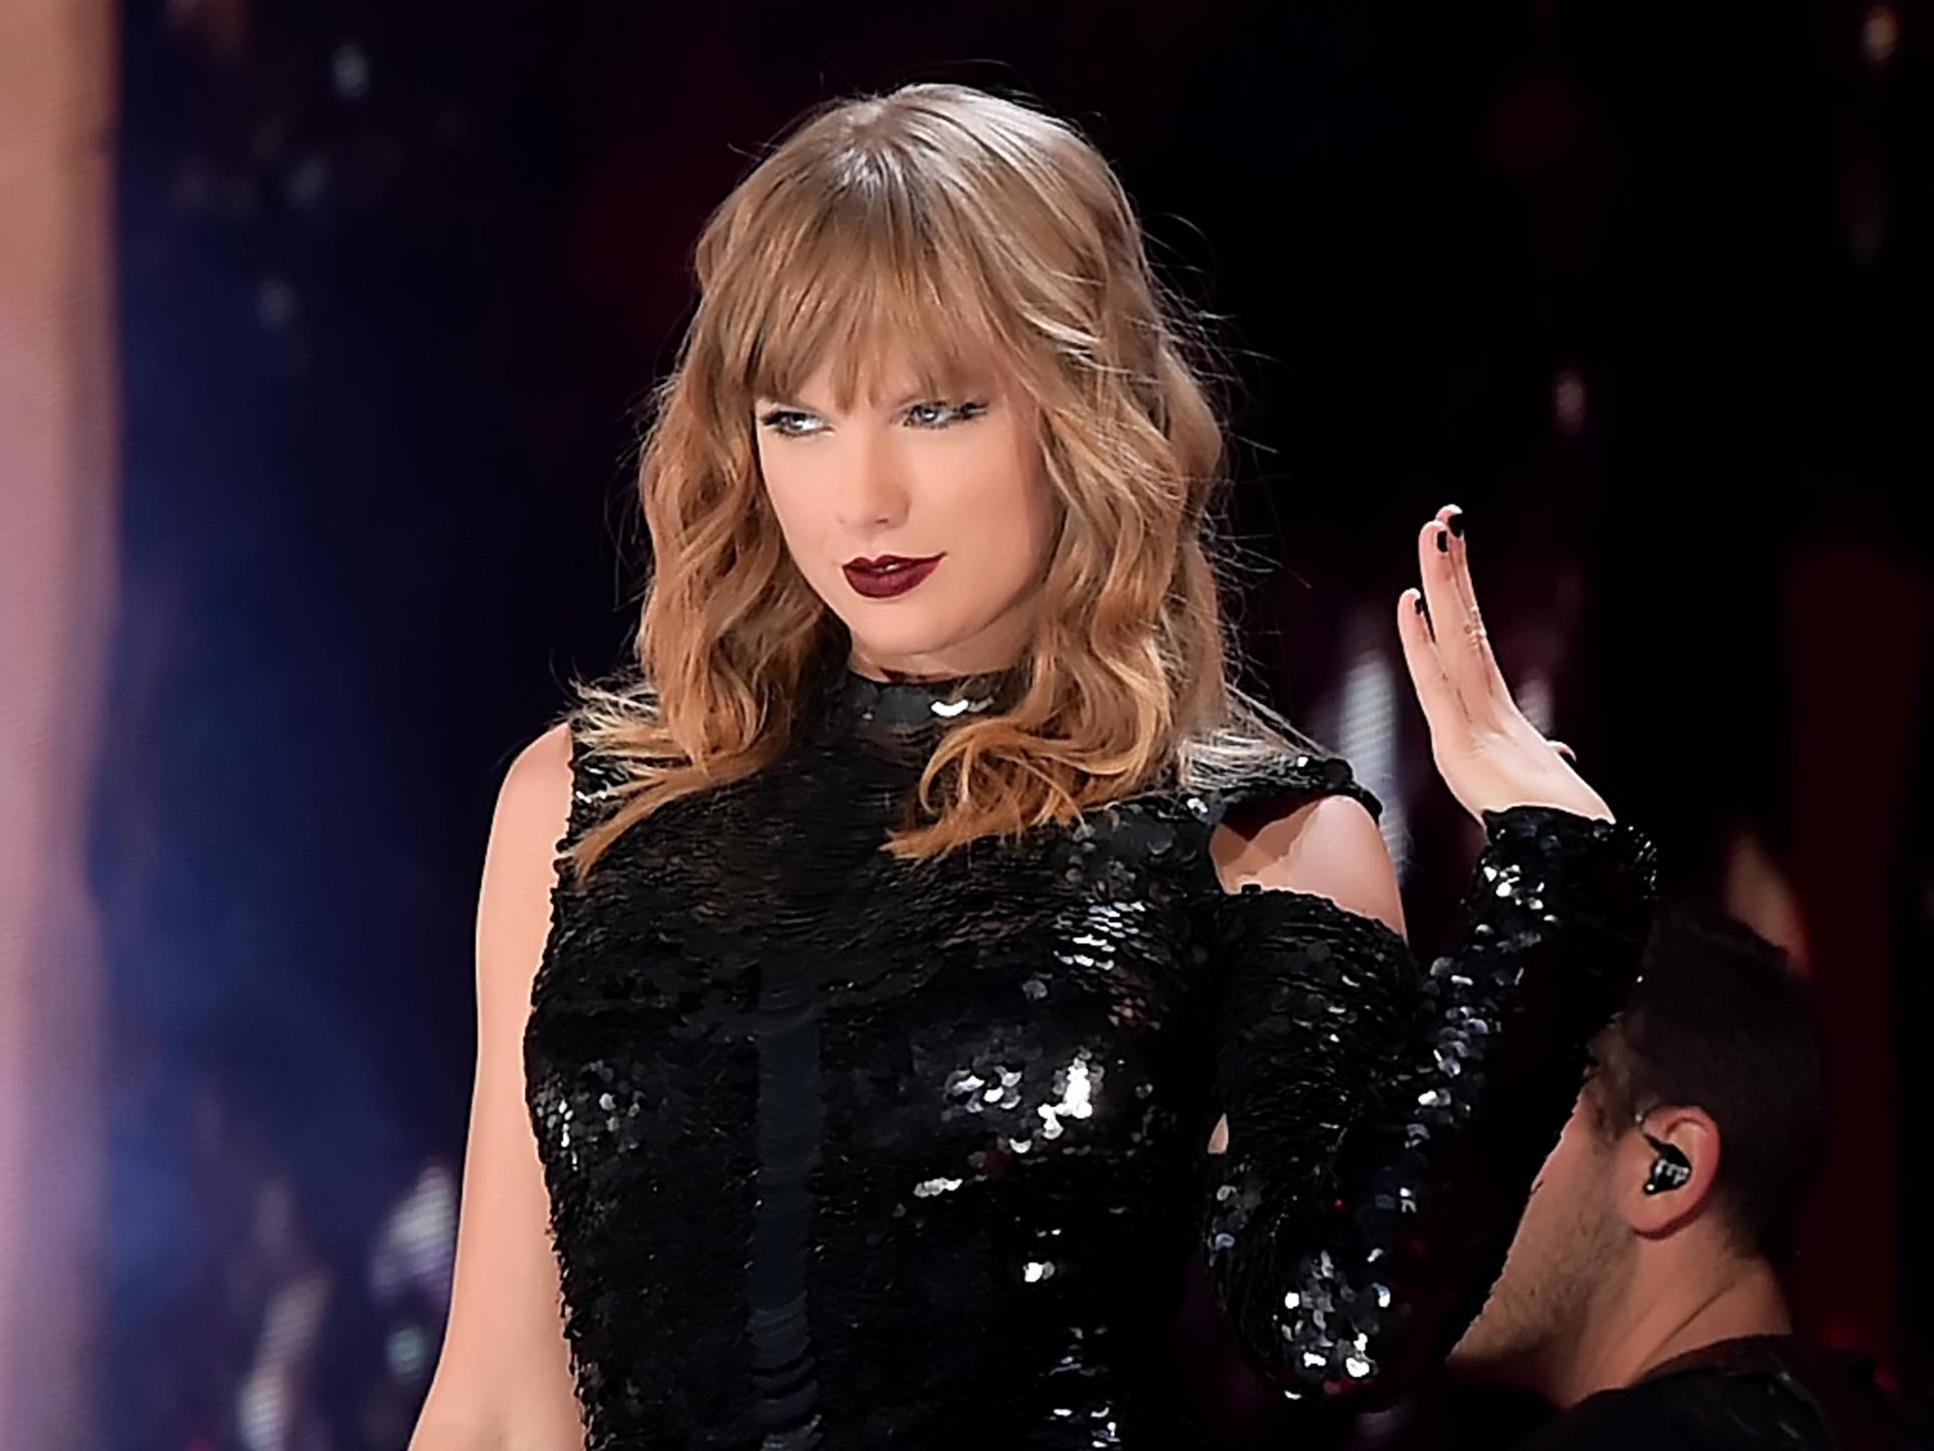 Taylor Swift pulls out of Melbourne Cup concert amid animal rights backlash